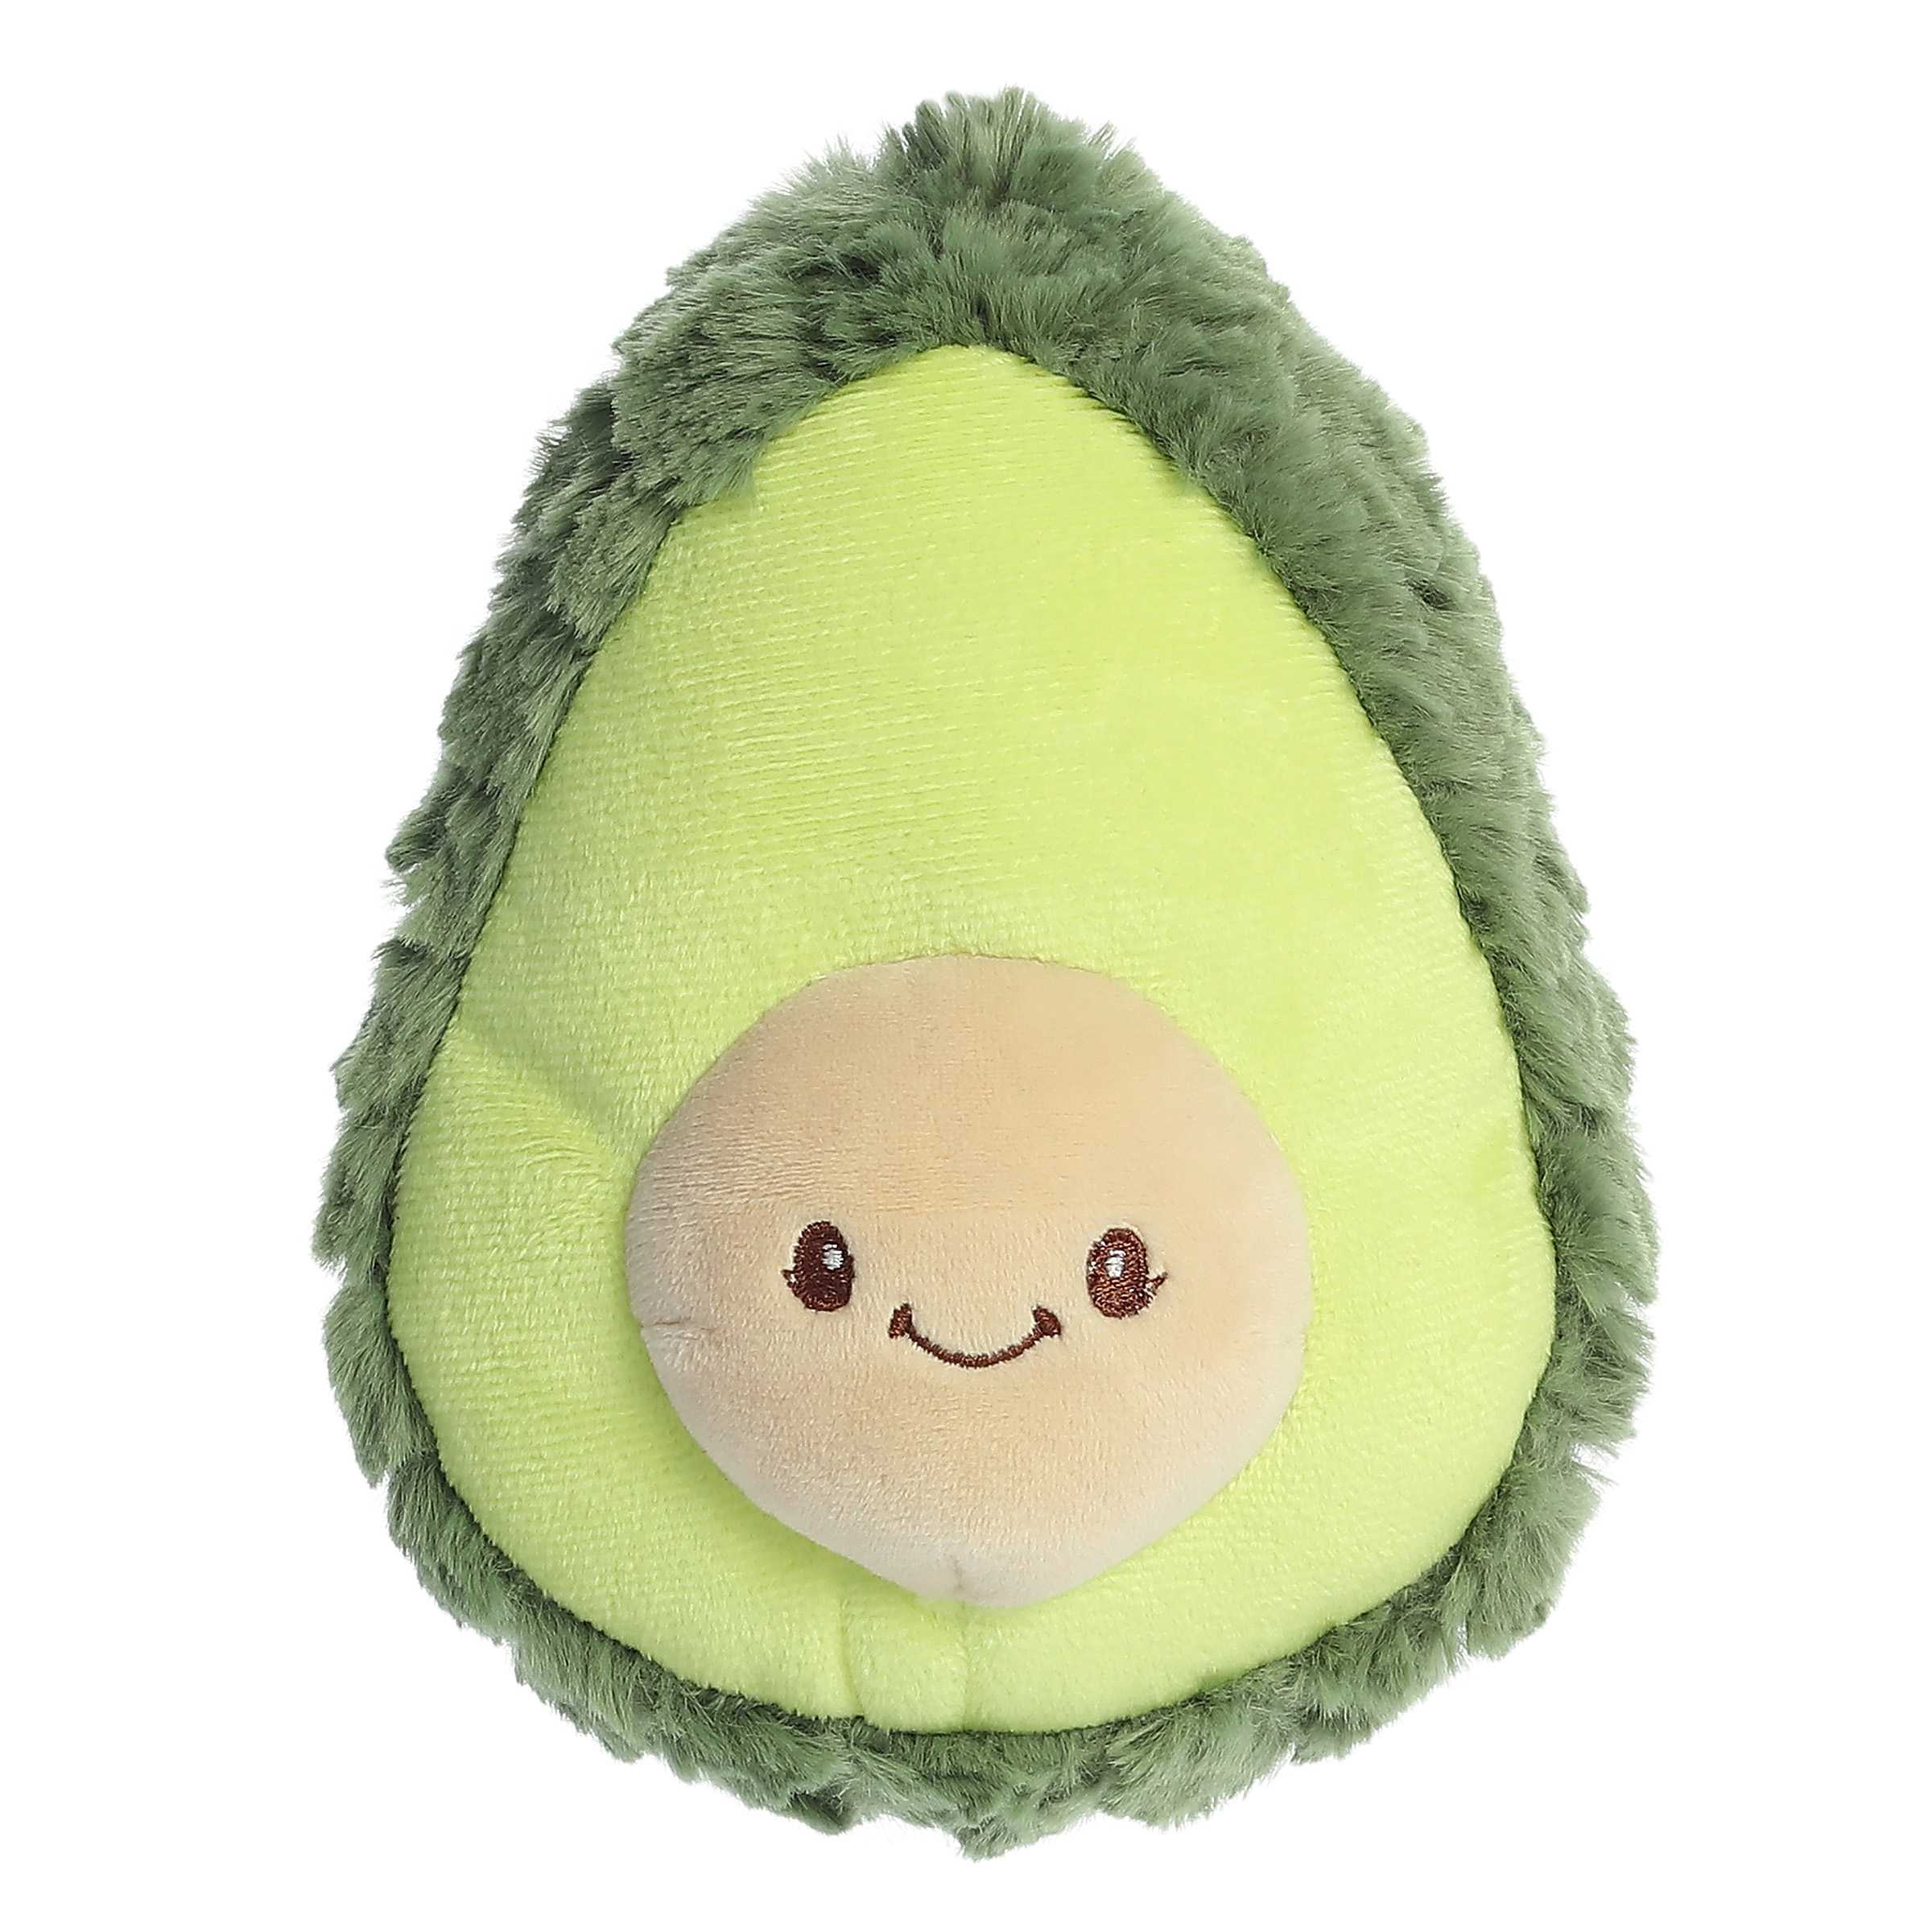 Adorable Avocado Plush Toy with a green round body, dark green fur on the back, and a yellow smiling face at the center